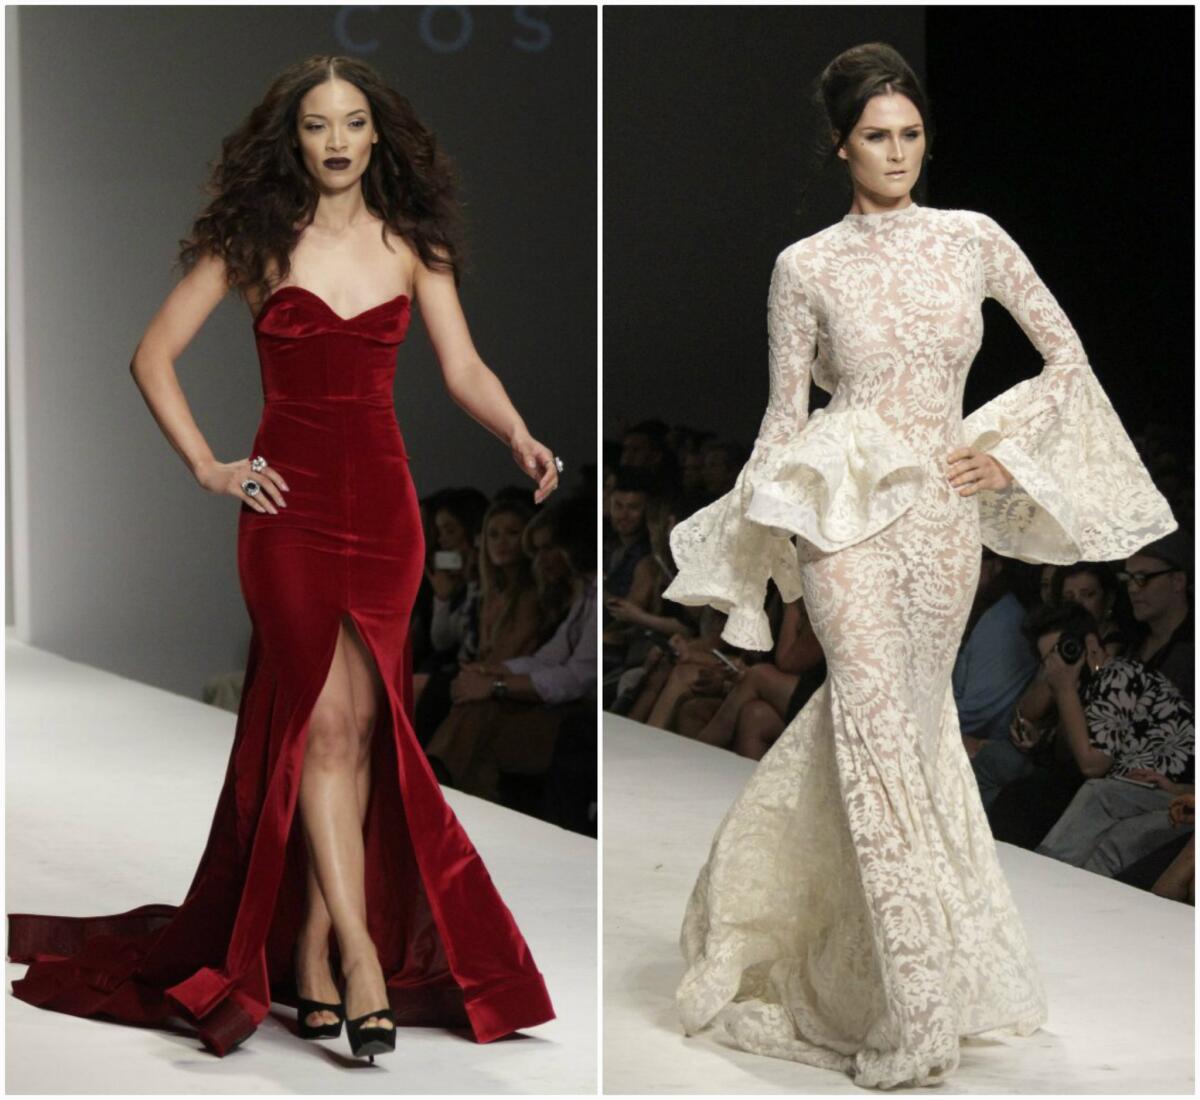 Braless models rock 70's perms as they storm Michael Costello catwalk at  New York Fashion Week in see-through lace gowns